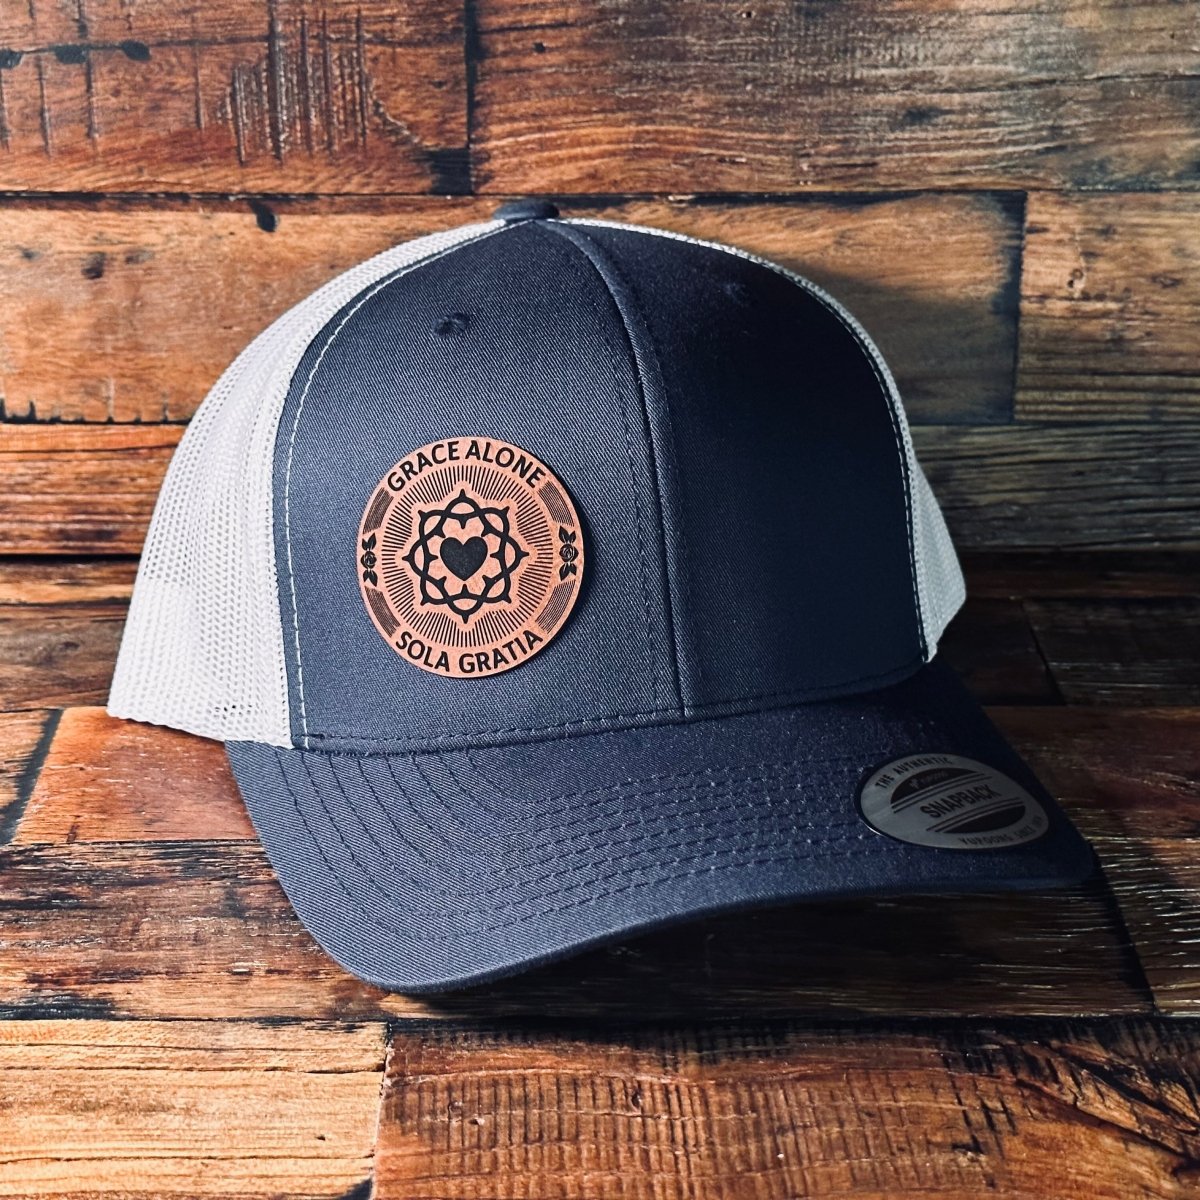 Hat - Sola Gratia Seal - Patch Hat - The Reformed Sage - #reformed# - #reformed_gifts# - #christian_gifts#